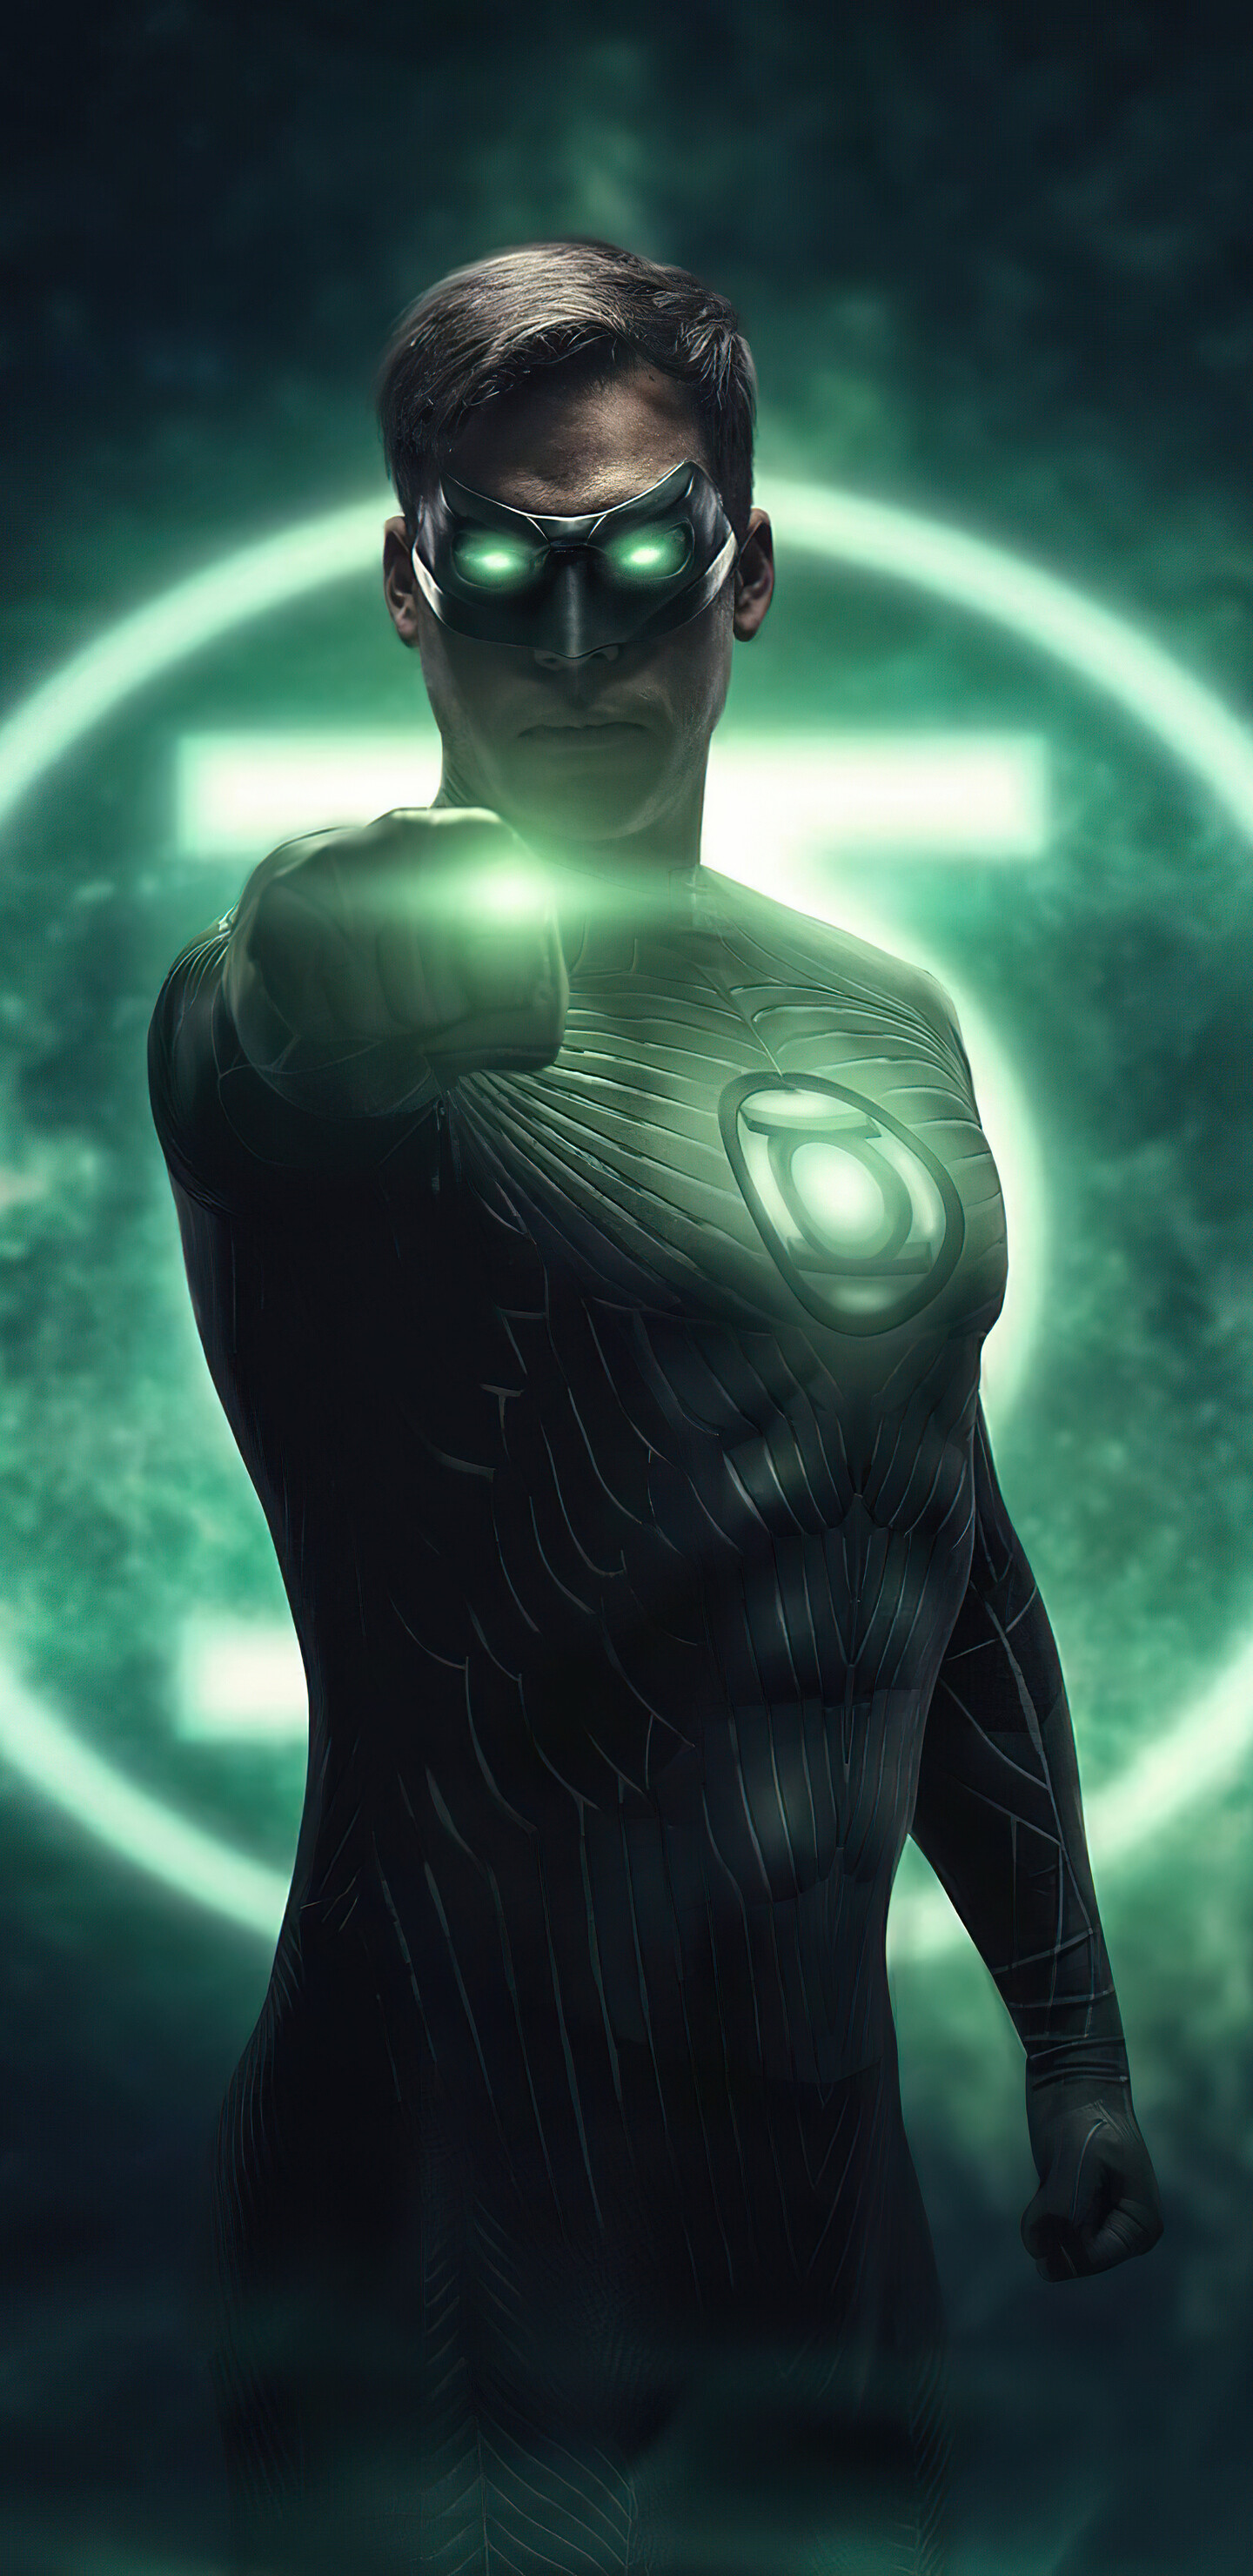 Green Lantern: Hal Jordan, A member of the Sinestro's Corps, Injustice 2. 1440x2960 HD Background.